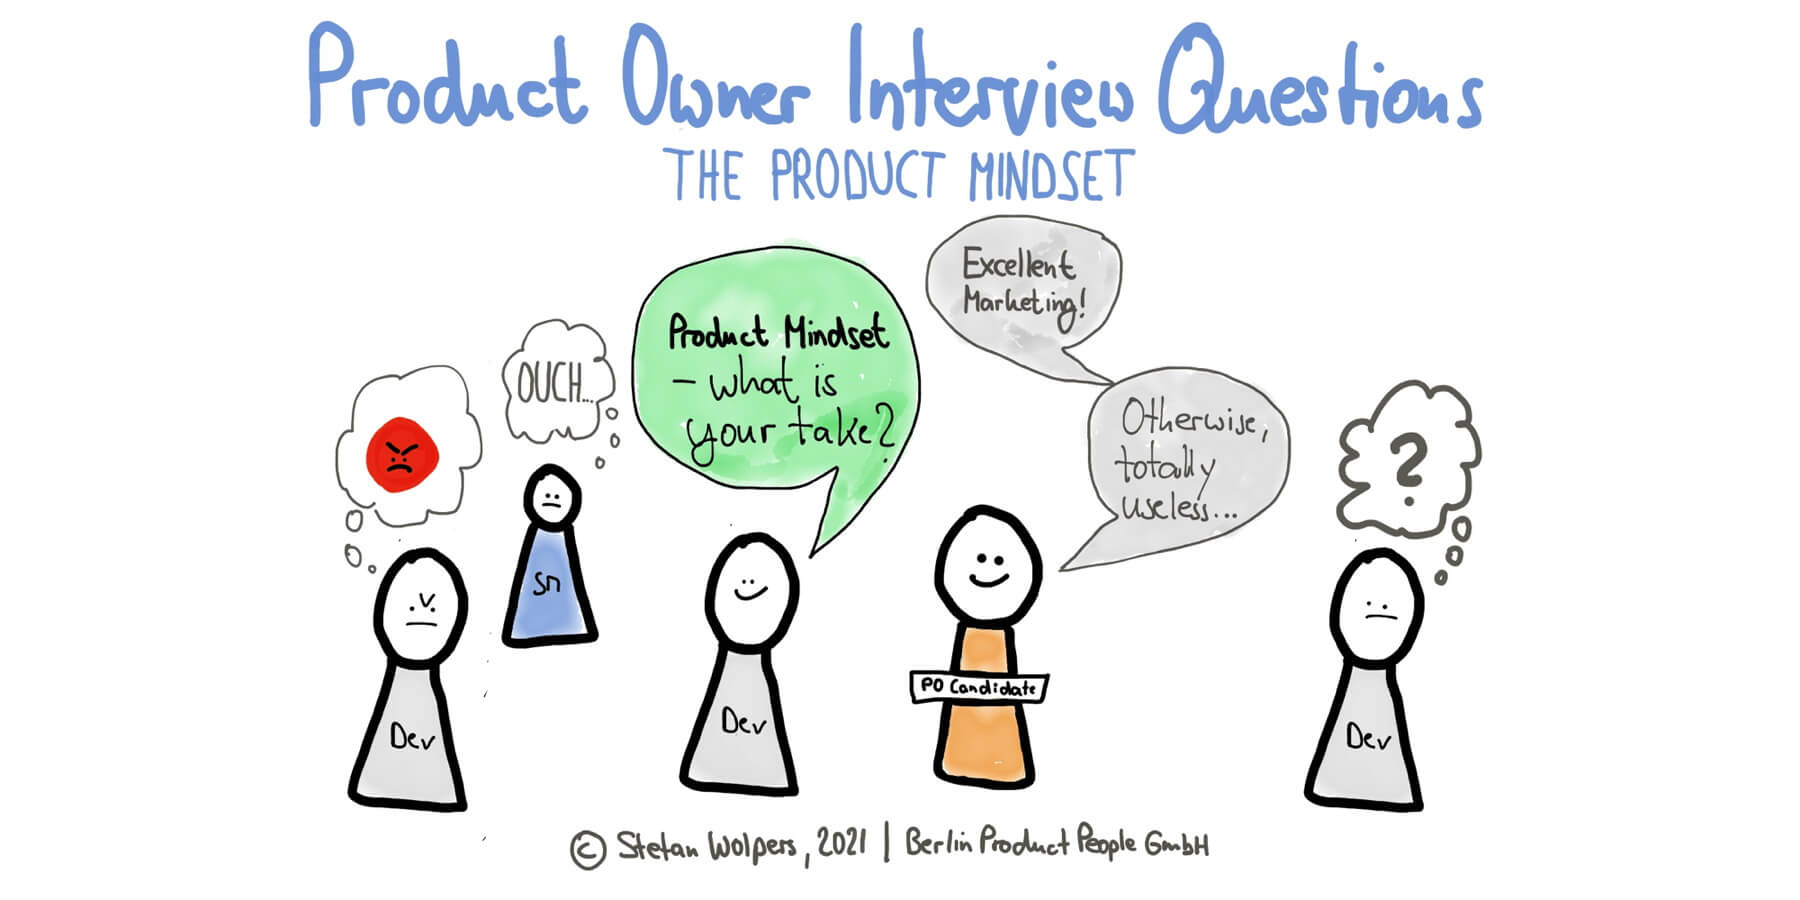 Product Owner Interview Questions